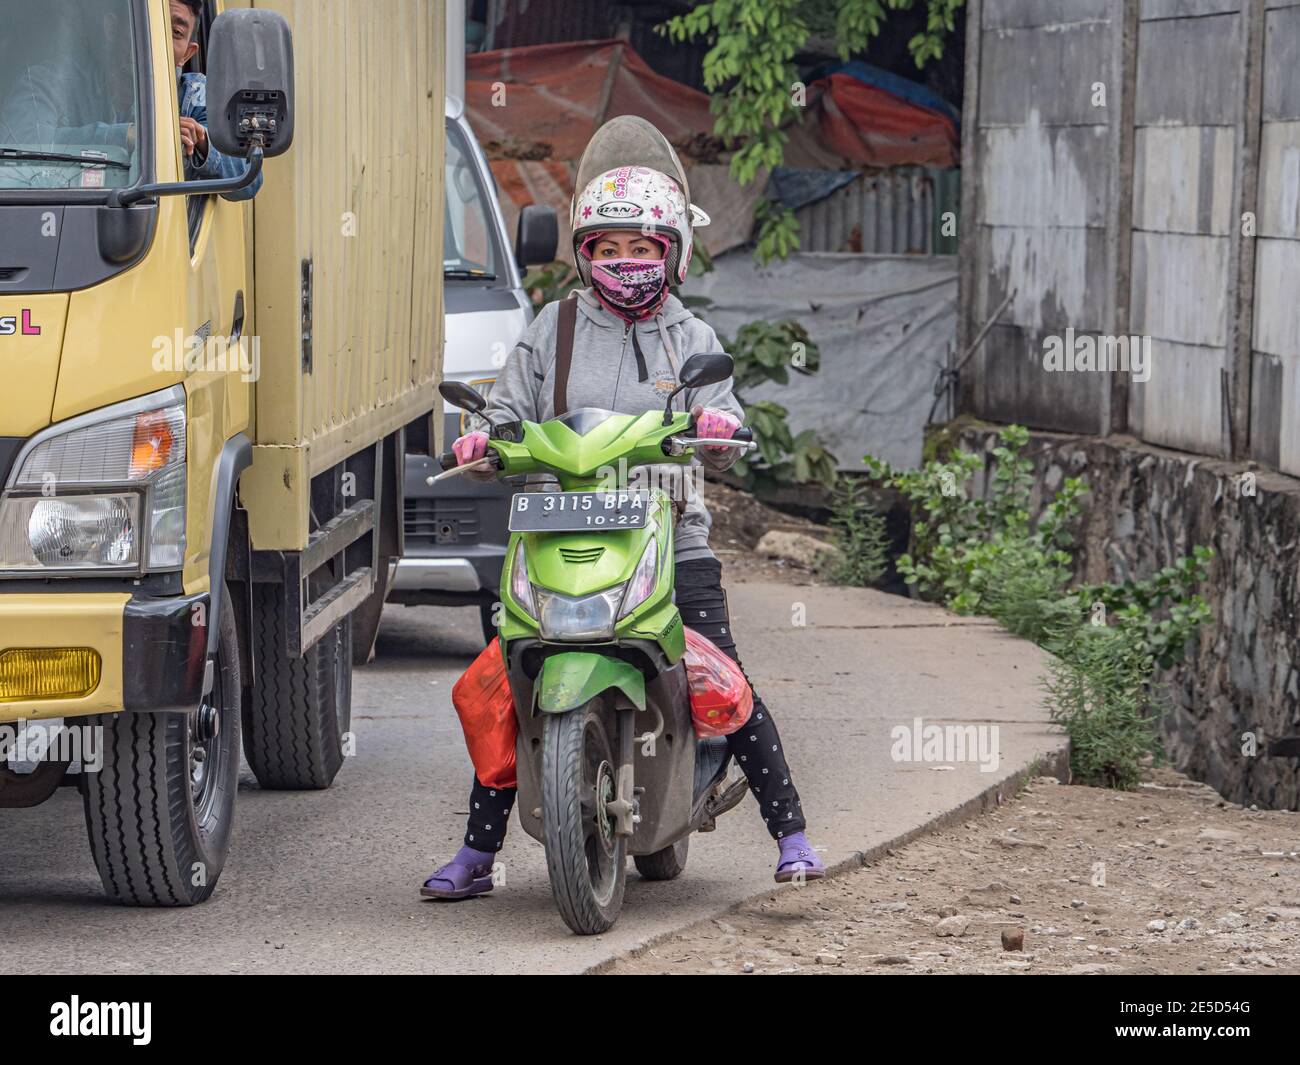 Jakarta, Indonesia - February 20, 2018: Woman on a motorcycle in a helmet, flip flops and a mask on the face on the street in Jakarta. Asia. Stock Photo